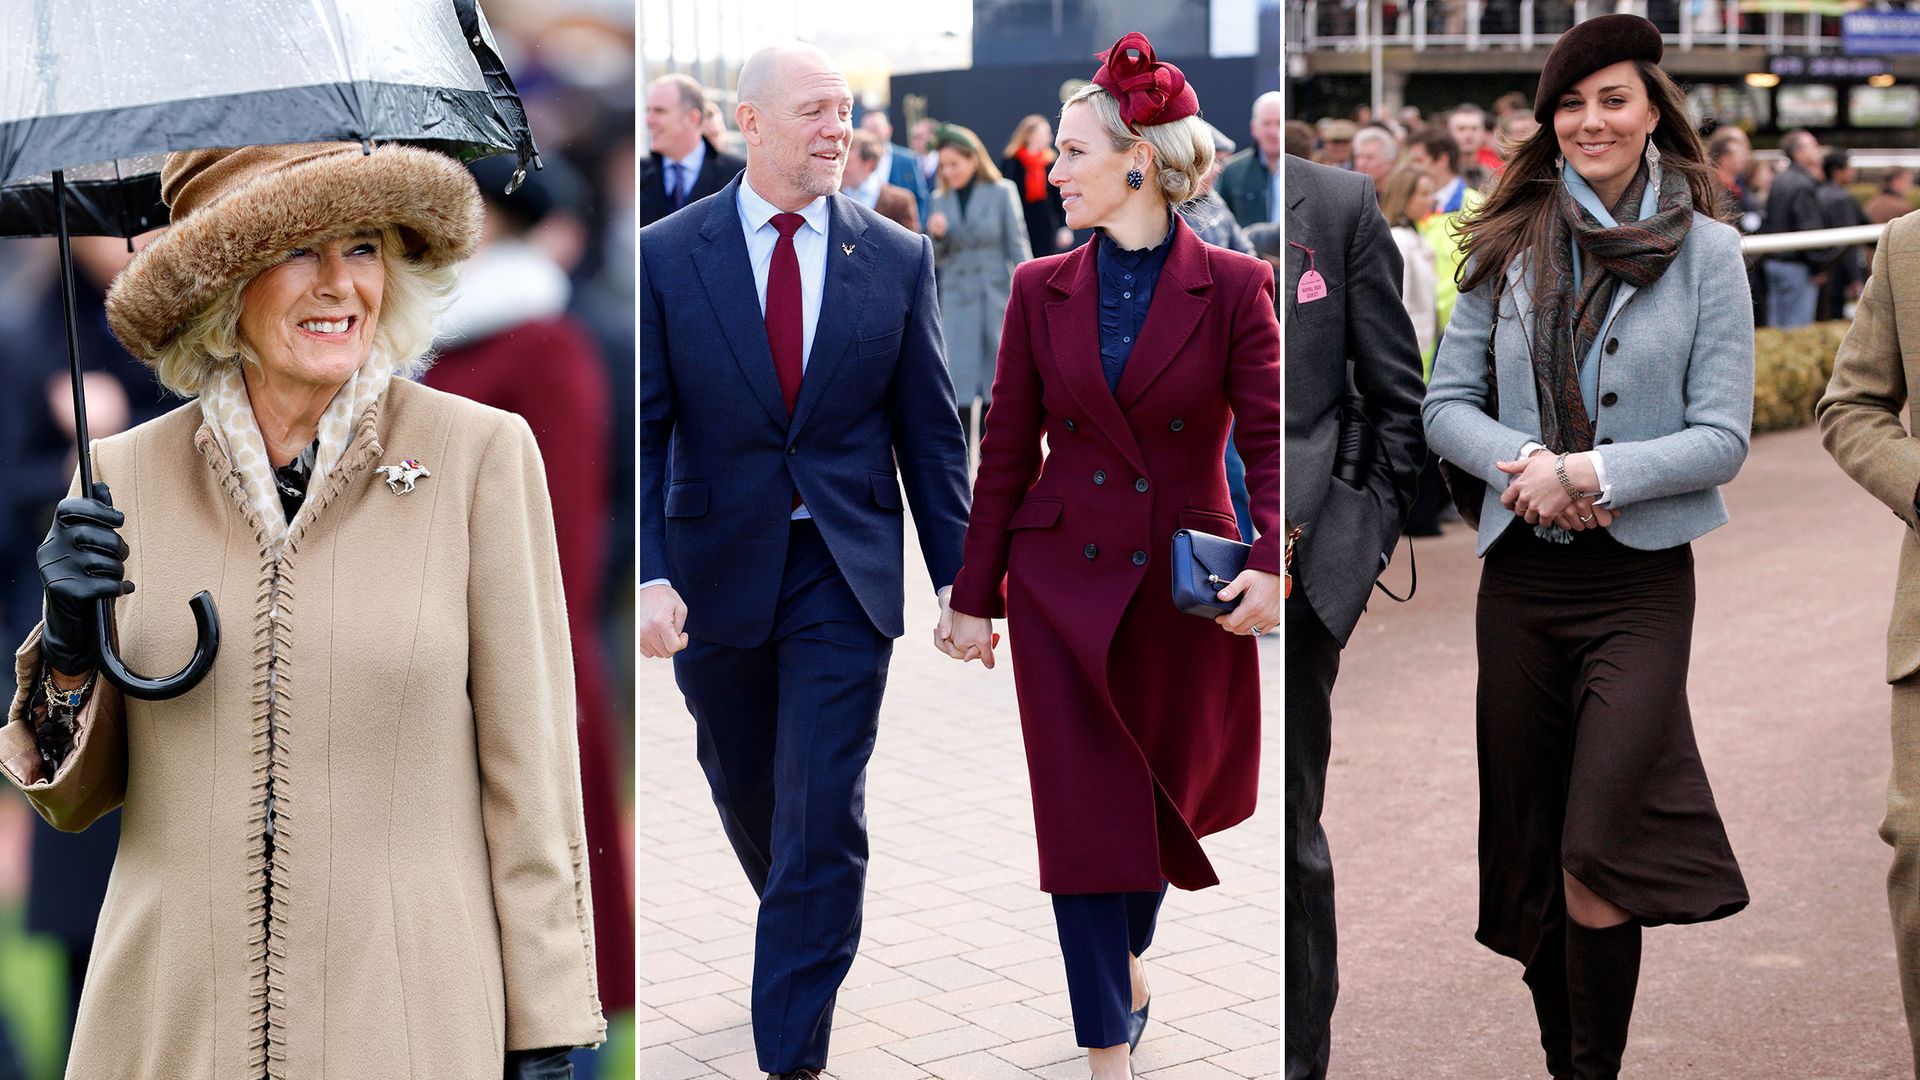 Royals at Cheltenham - Queen Camilla, Mike and Zara Tindall and Kate Middleton